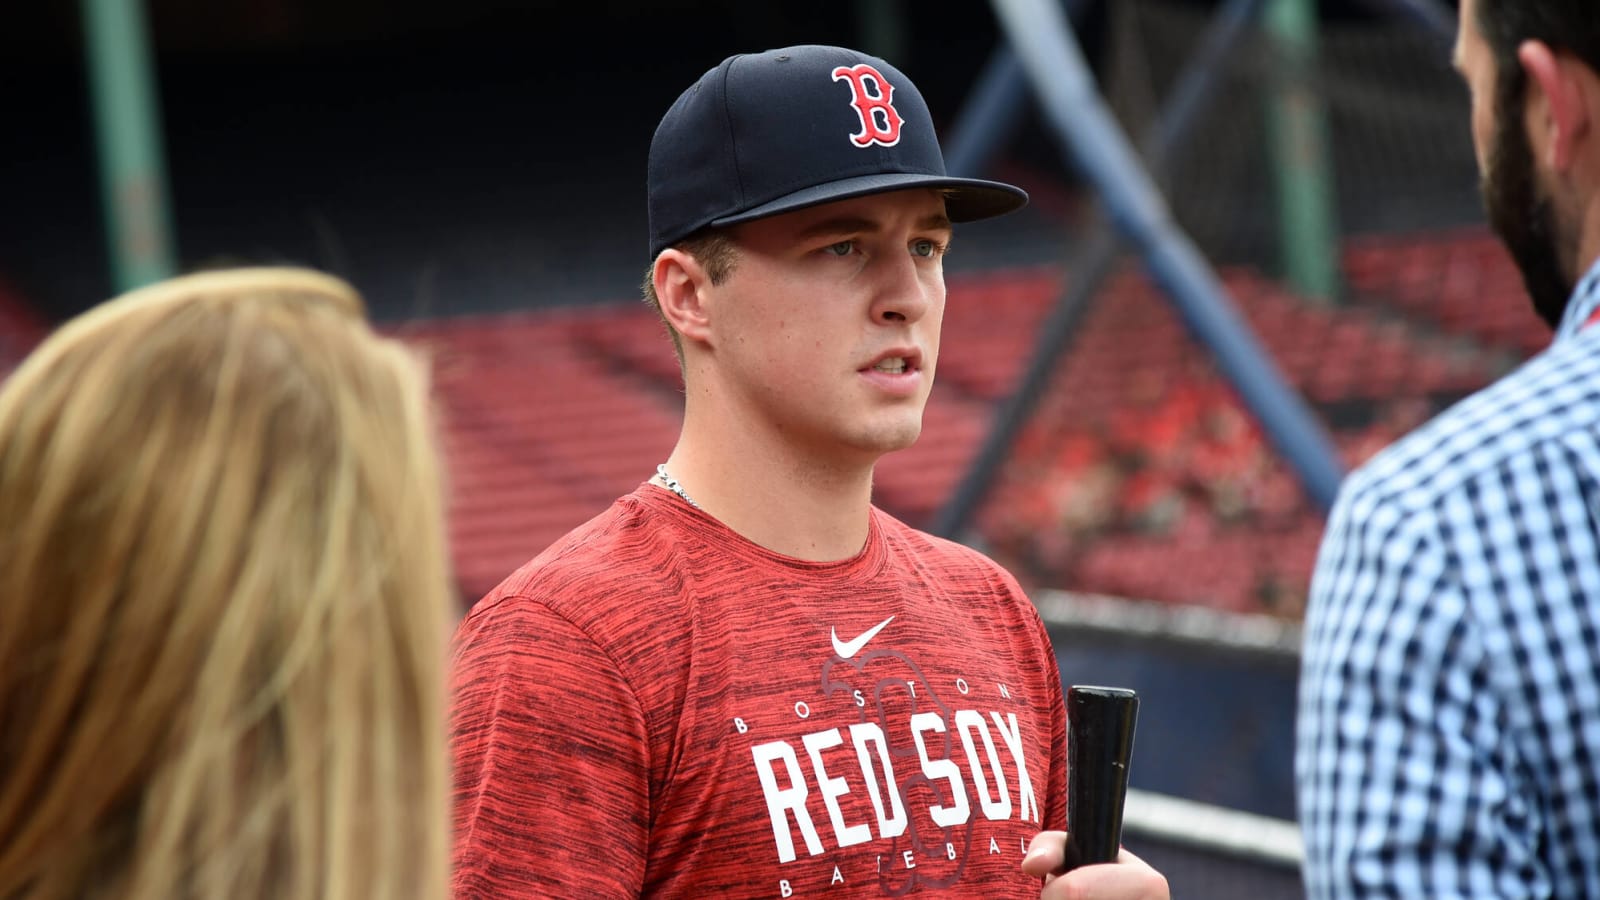 How did Red Sox catching prospect Kyle Teel fare in pro debut?